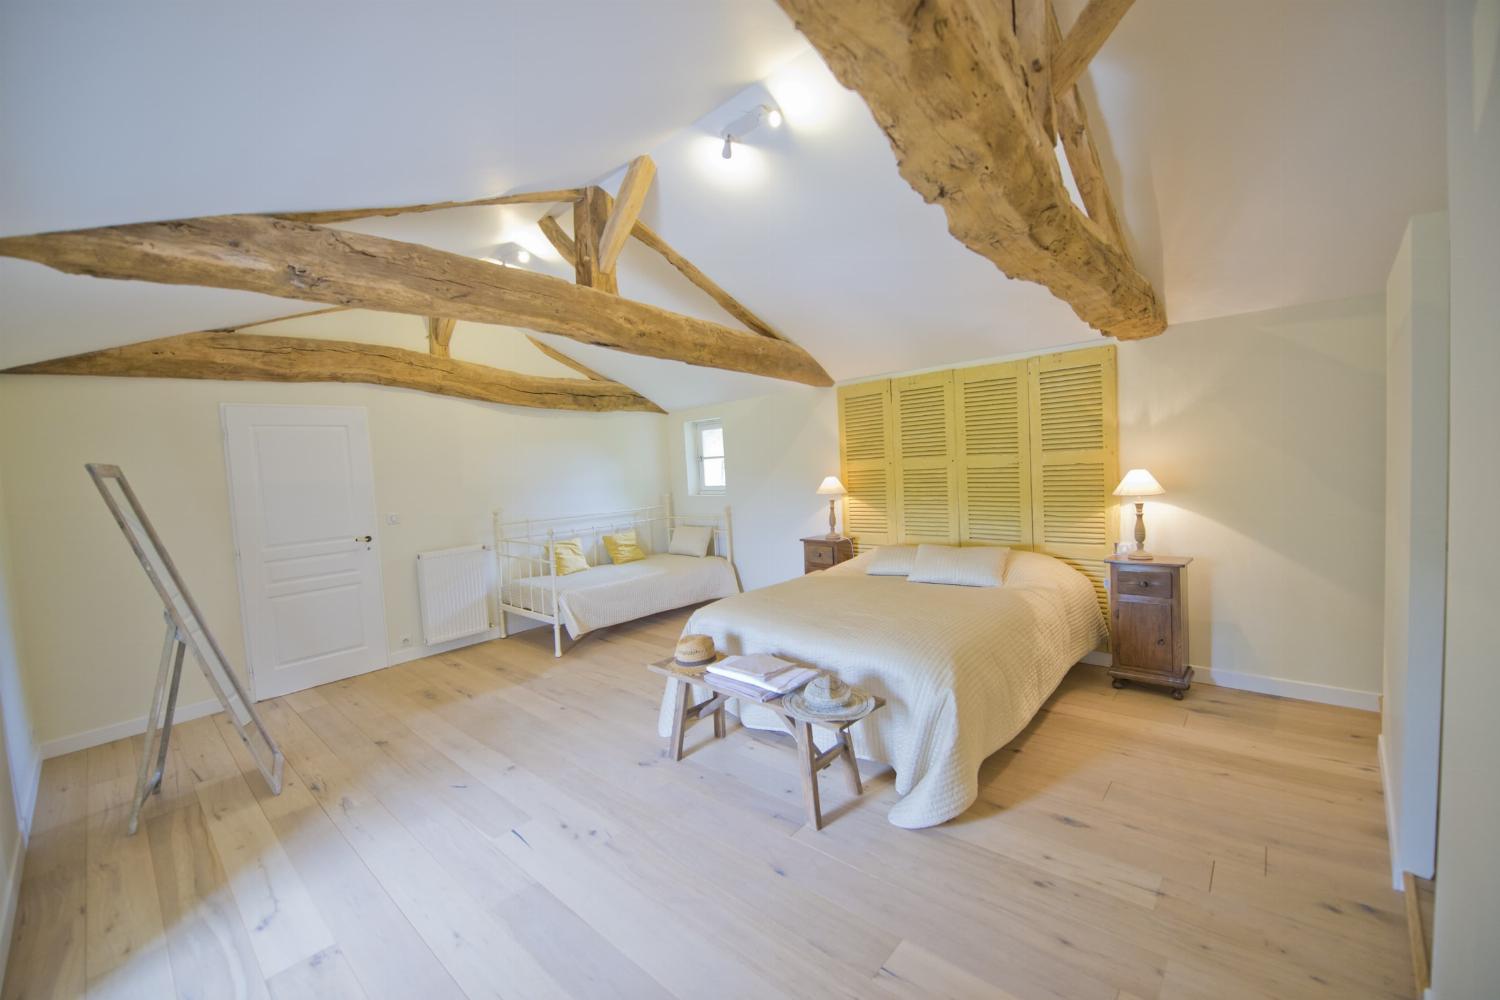 Bedroom | Rental accommodation in Charente